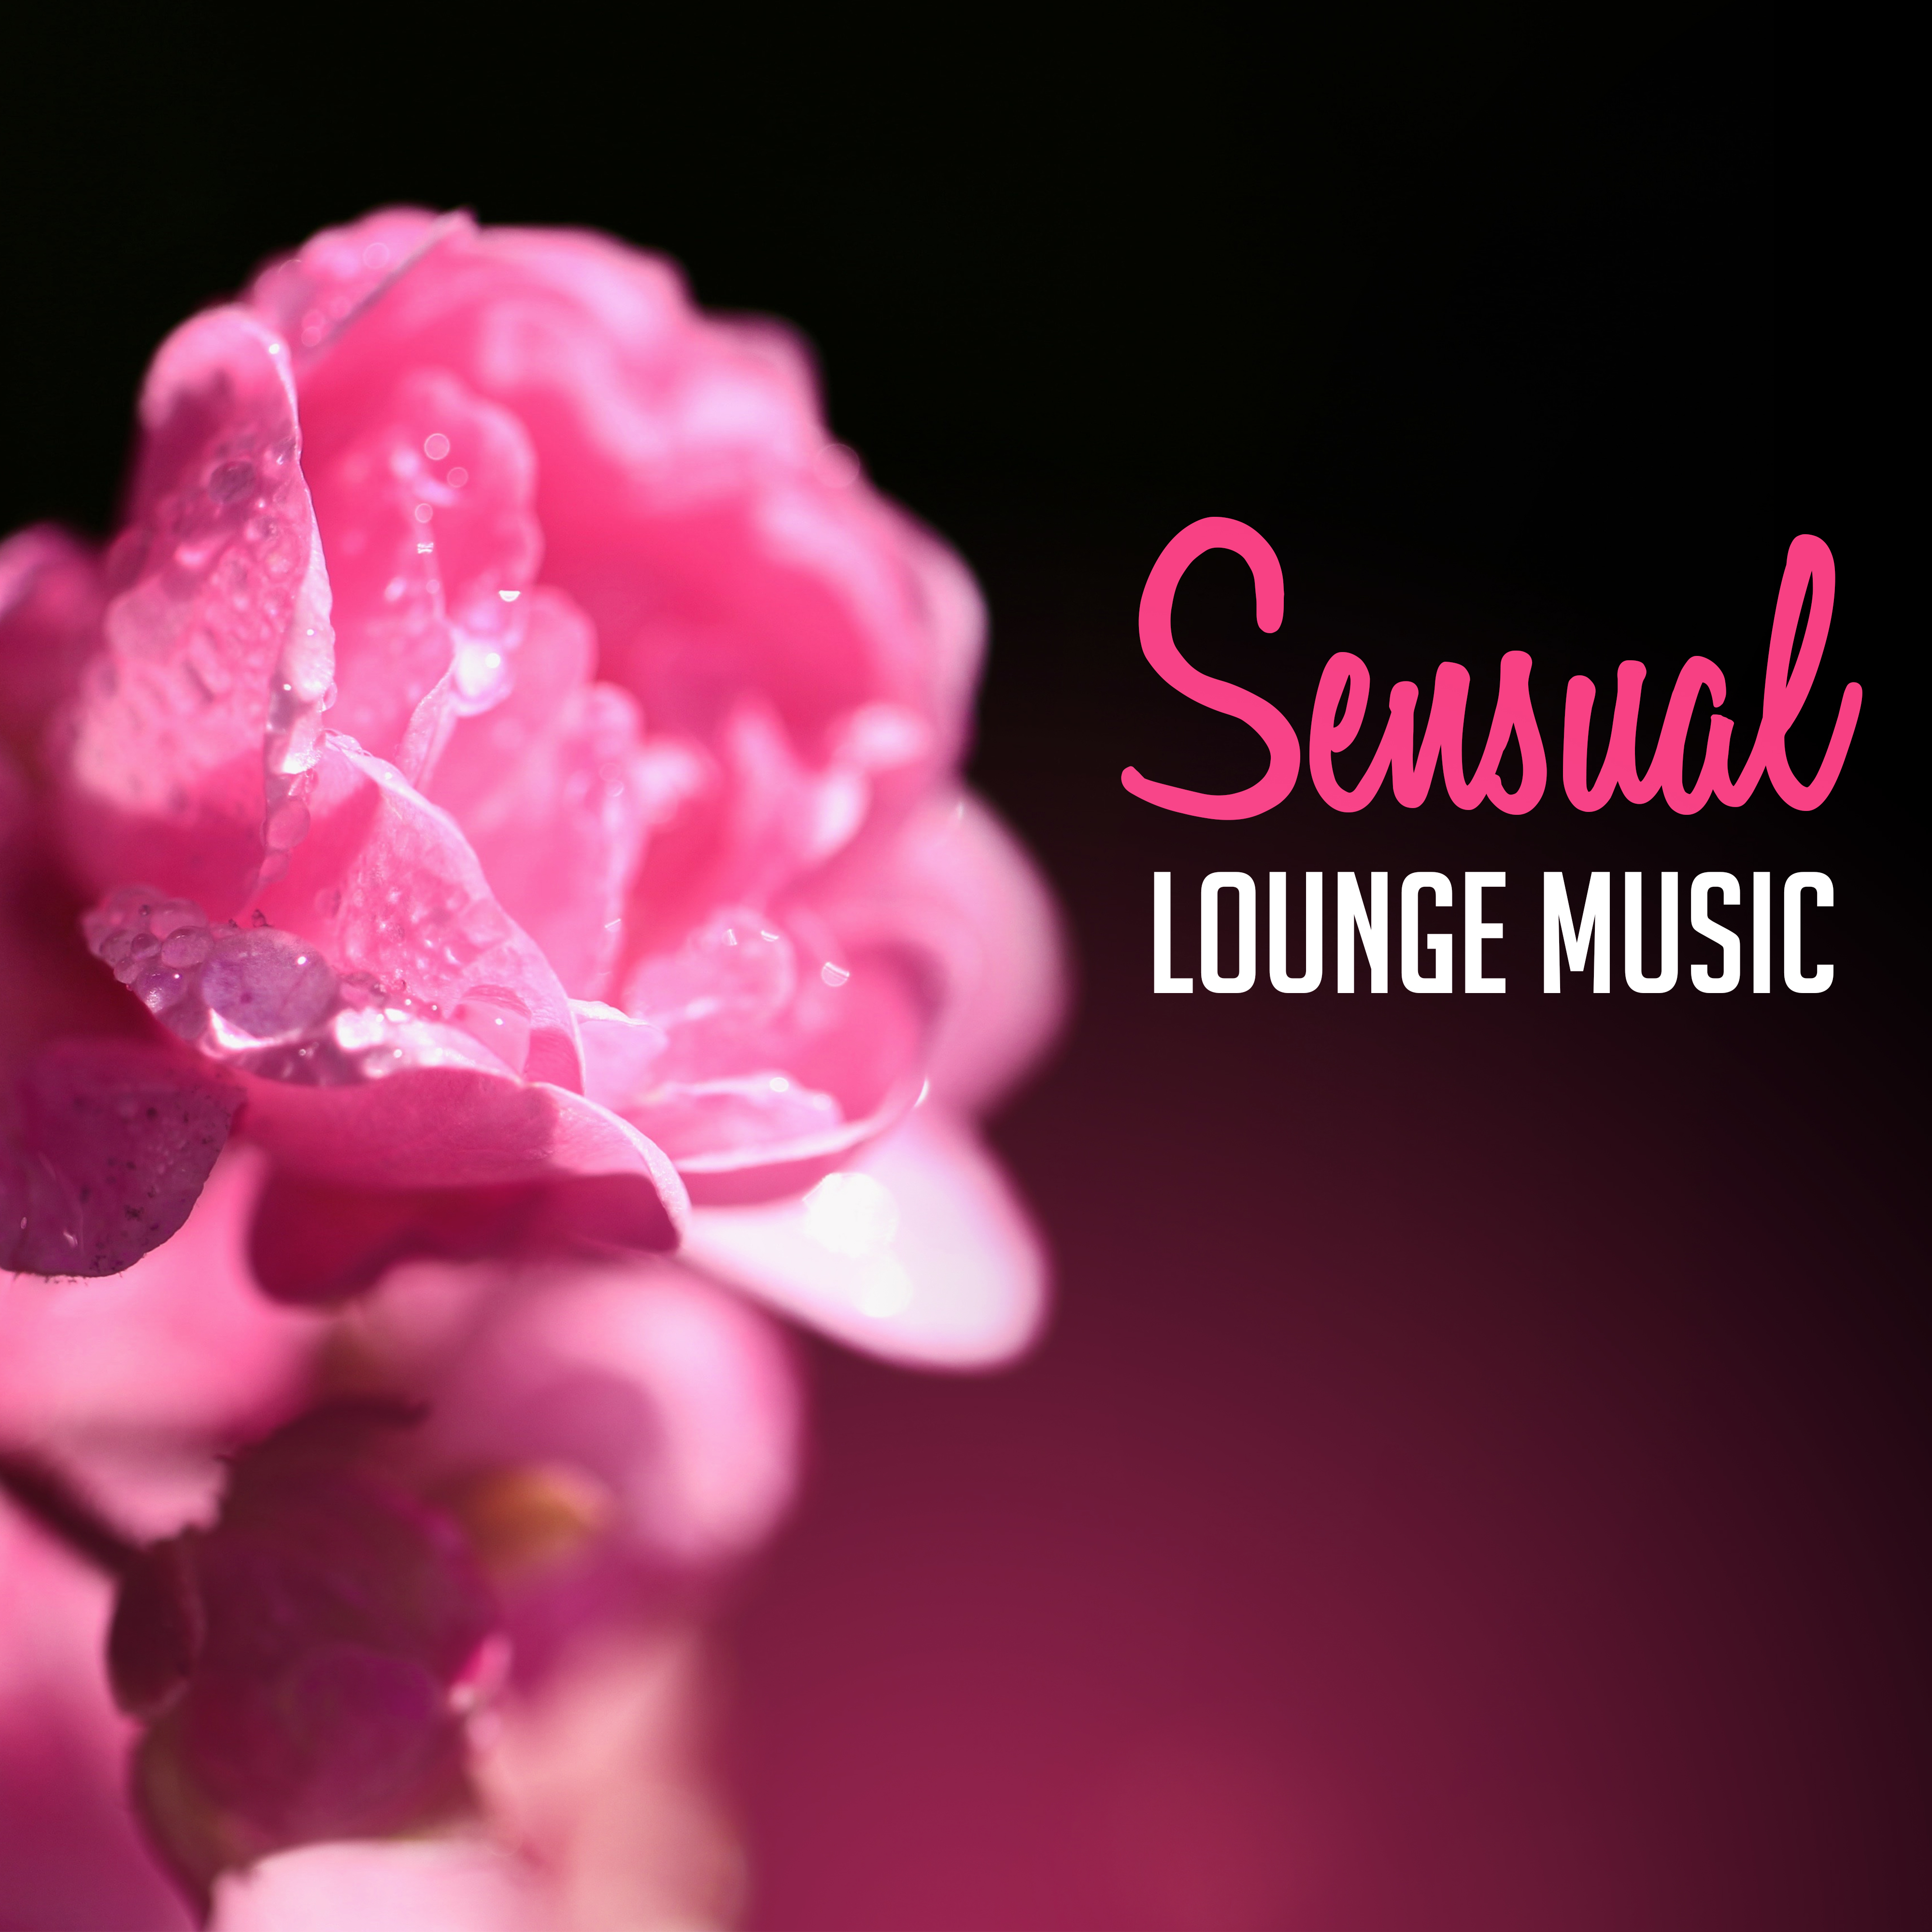 Sensual Lounge Music – **** Jazz, Gentle Piano, Relax for Lovers, Erotic Jazz, Intimate Moment